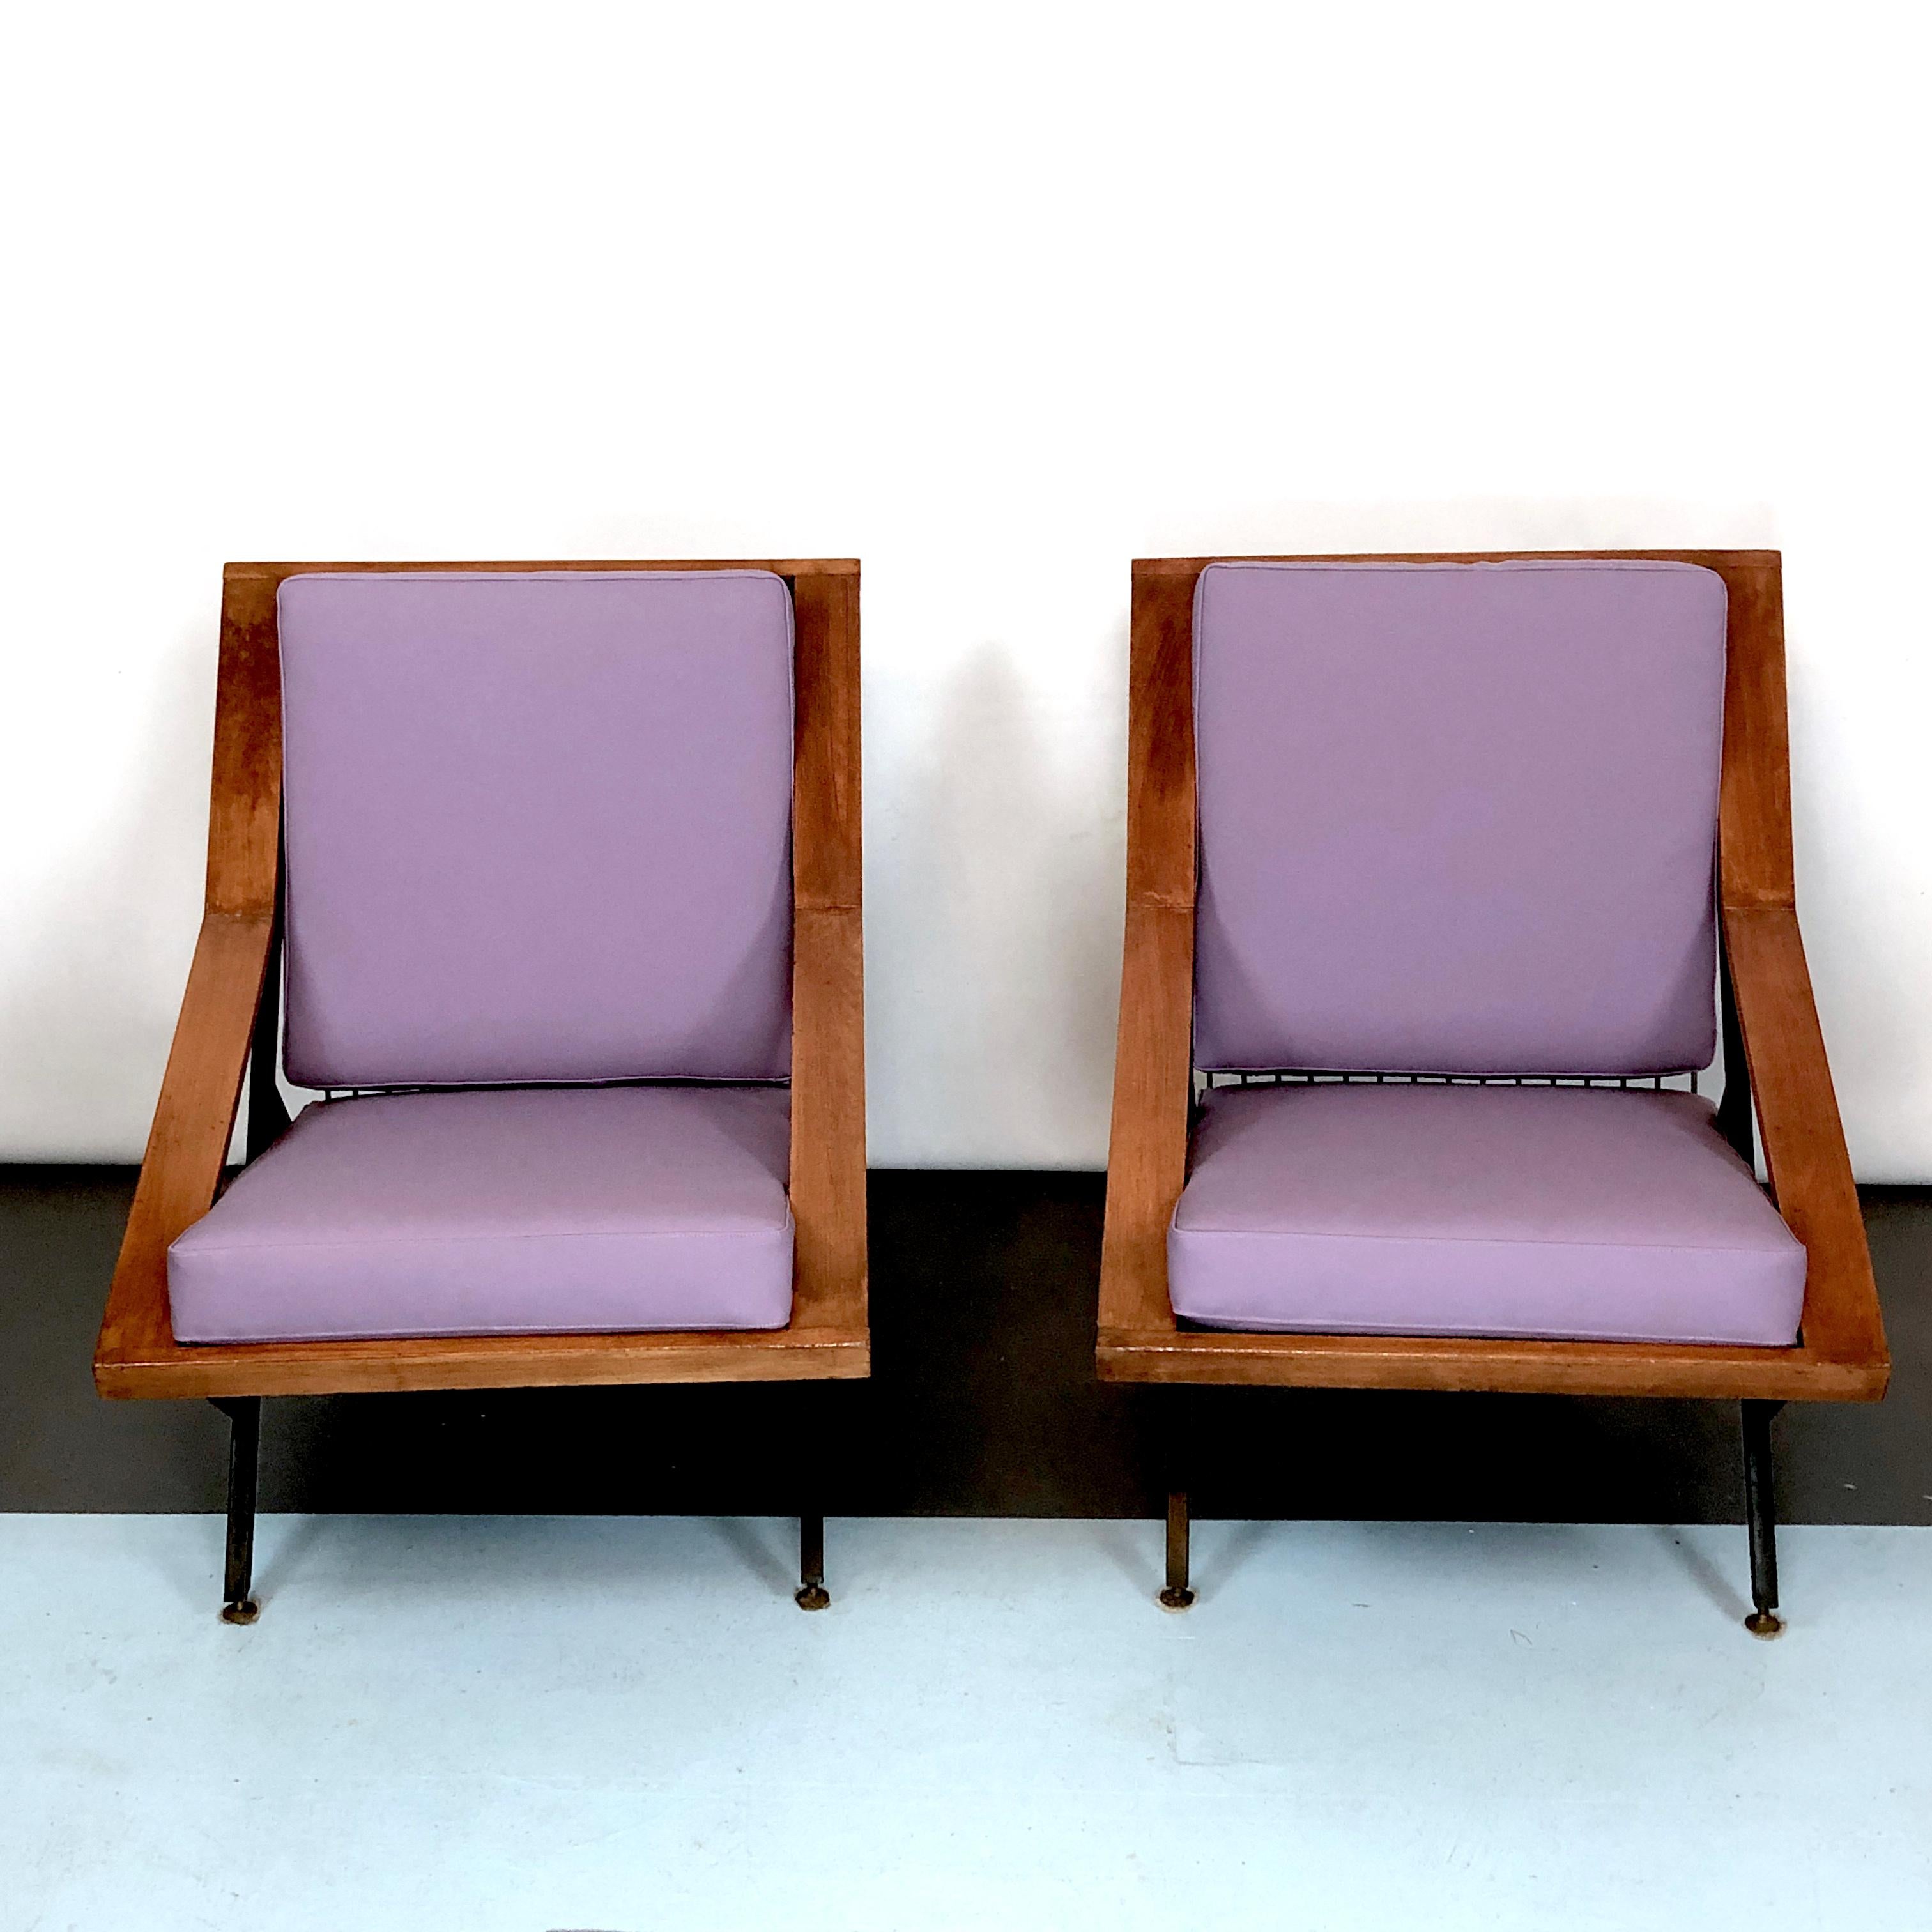 Great condition for this Italian armchairs from 50s and made from wood, lacquered metal and lilac leatherette. Normal trace of age and use.